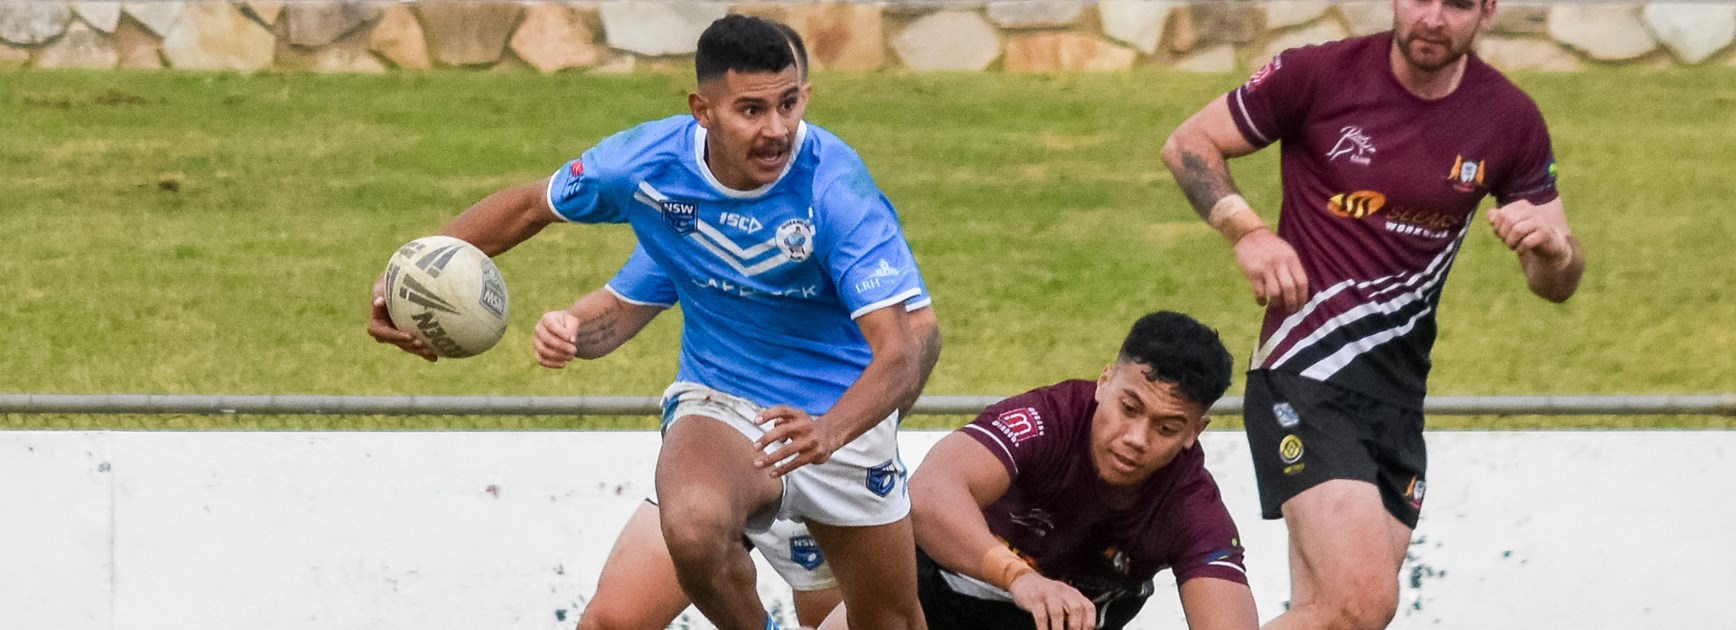 Canberra Region rep sides announced vs Newcastle